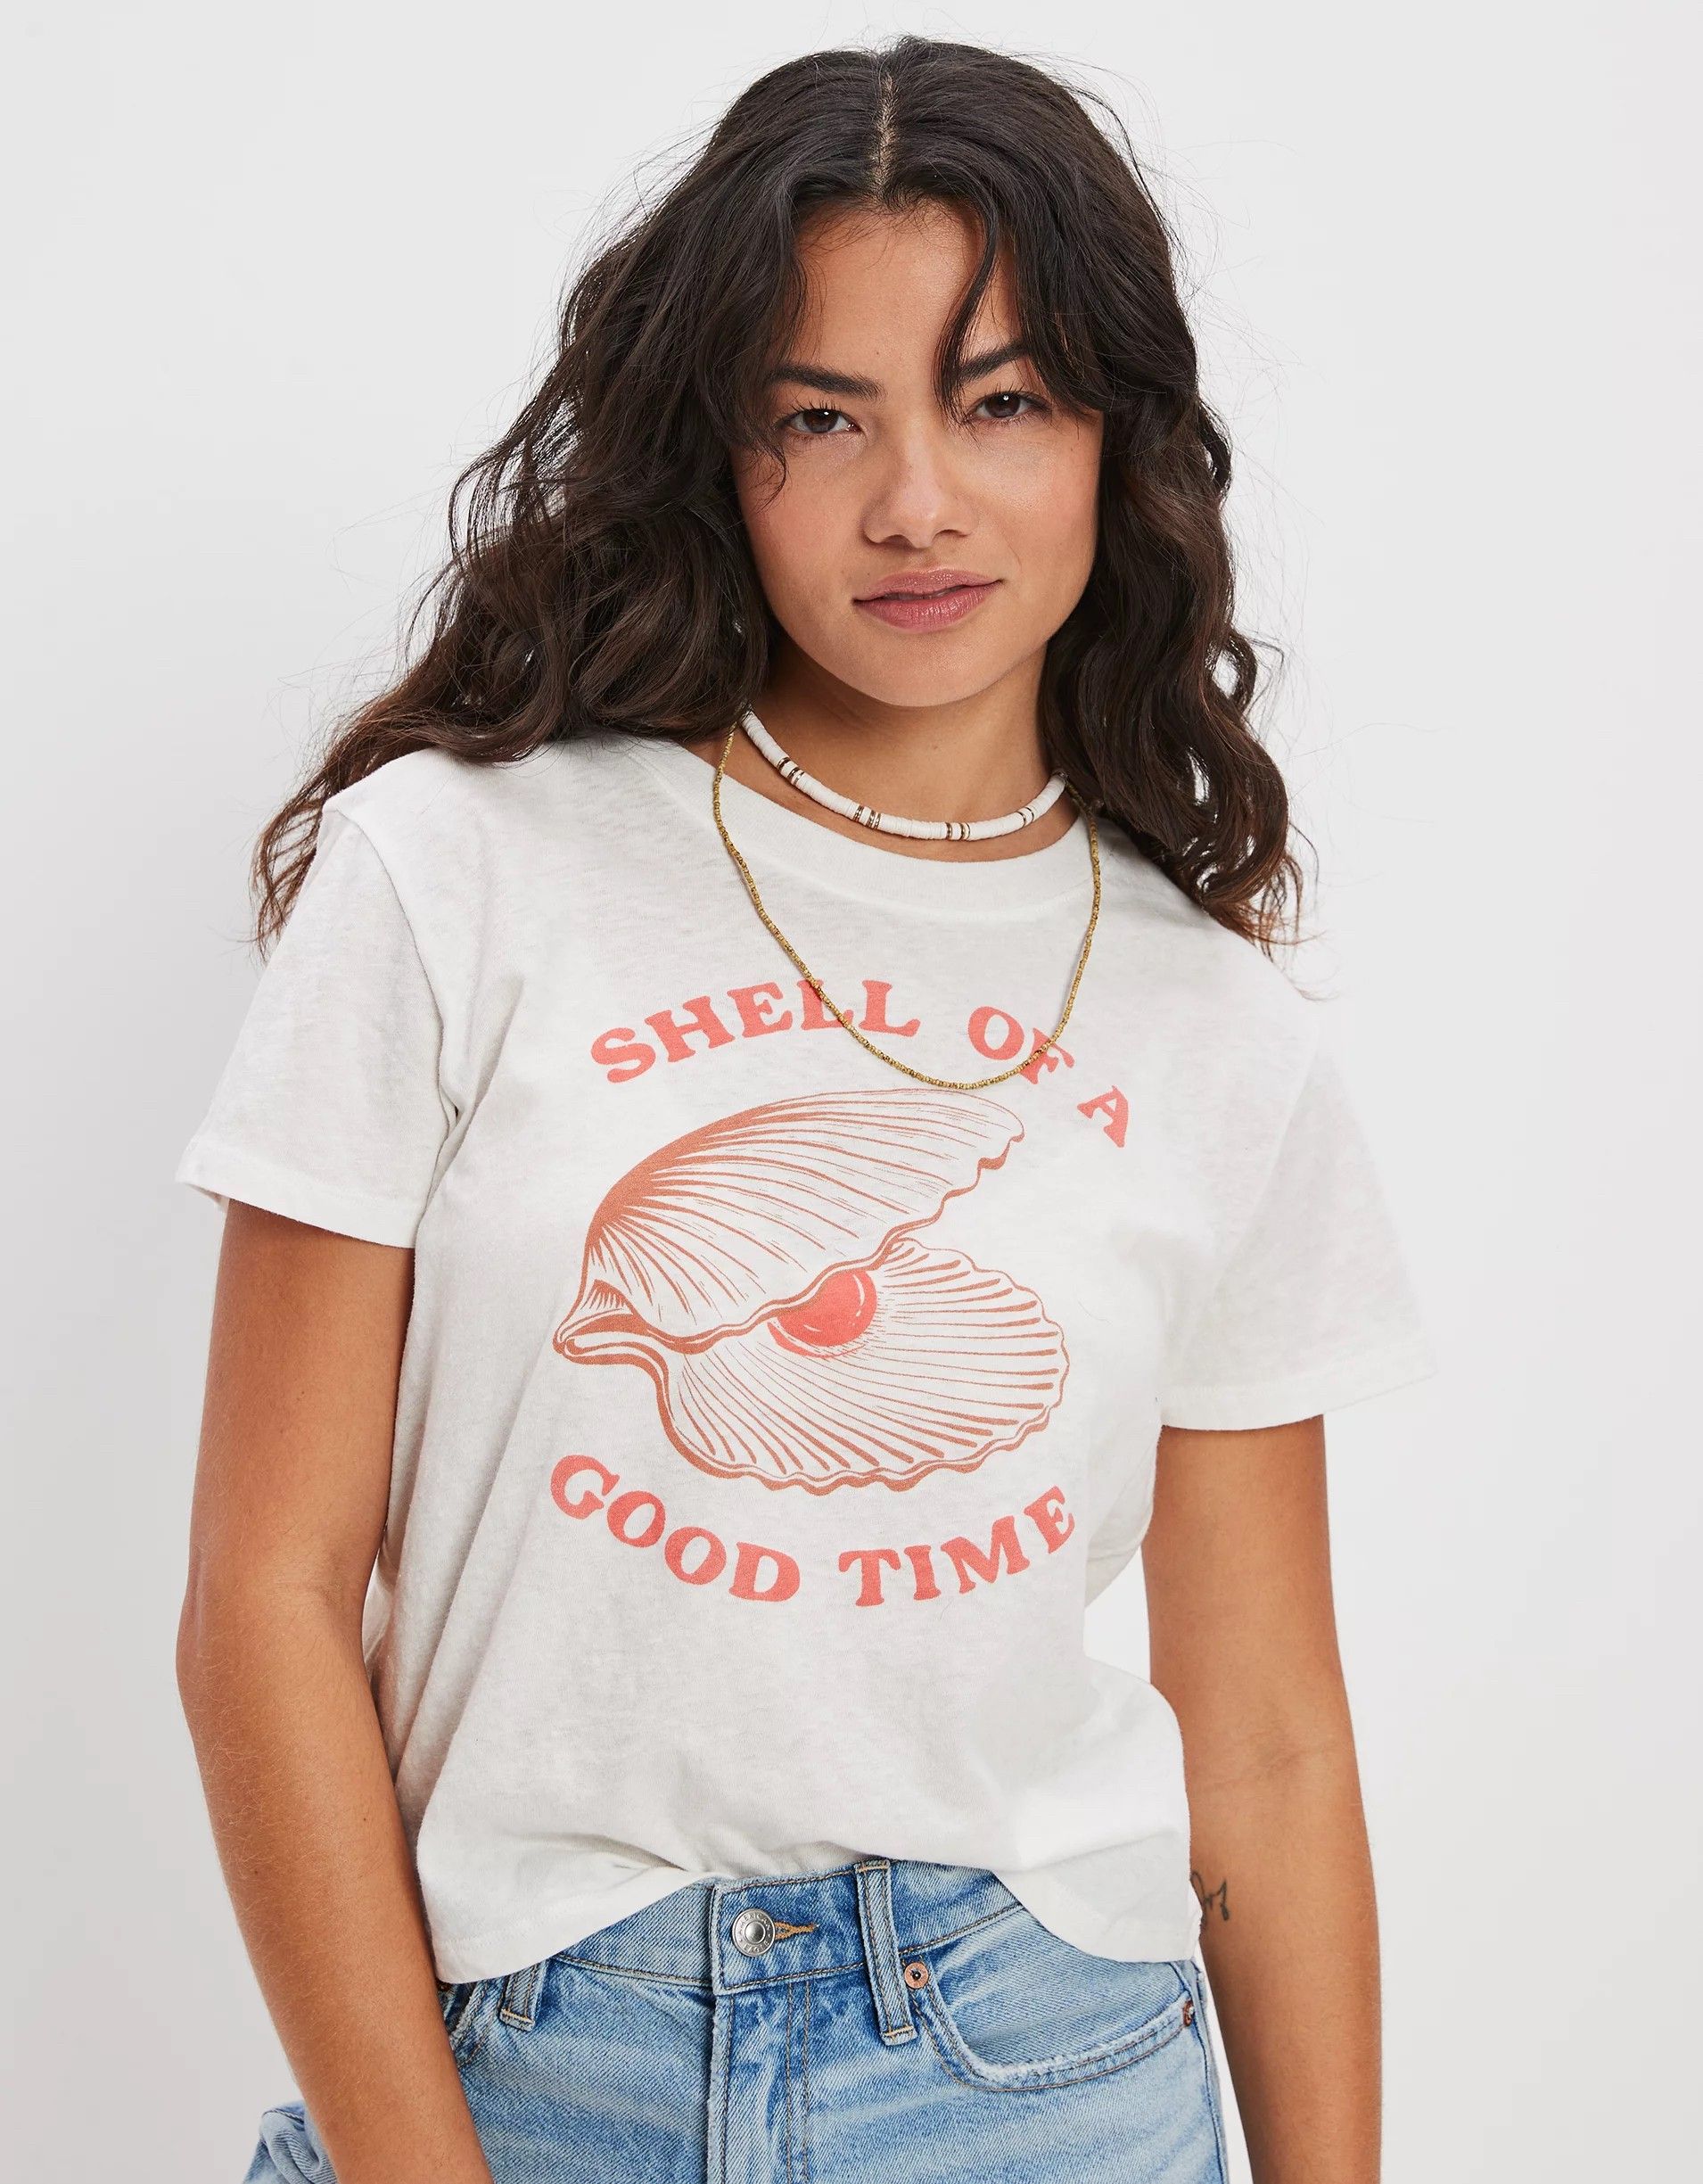 Women's Graphic Tees For Summer 2023 - Brit + Co